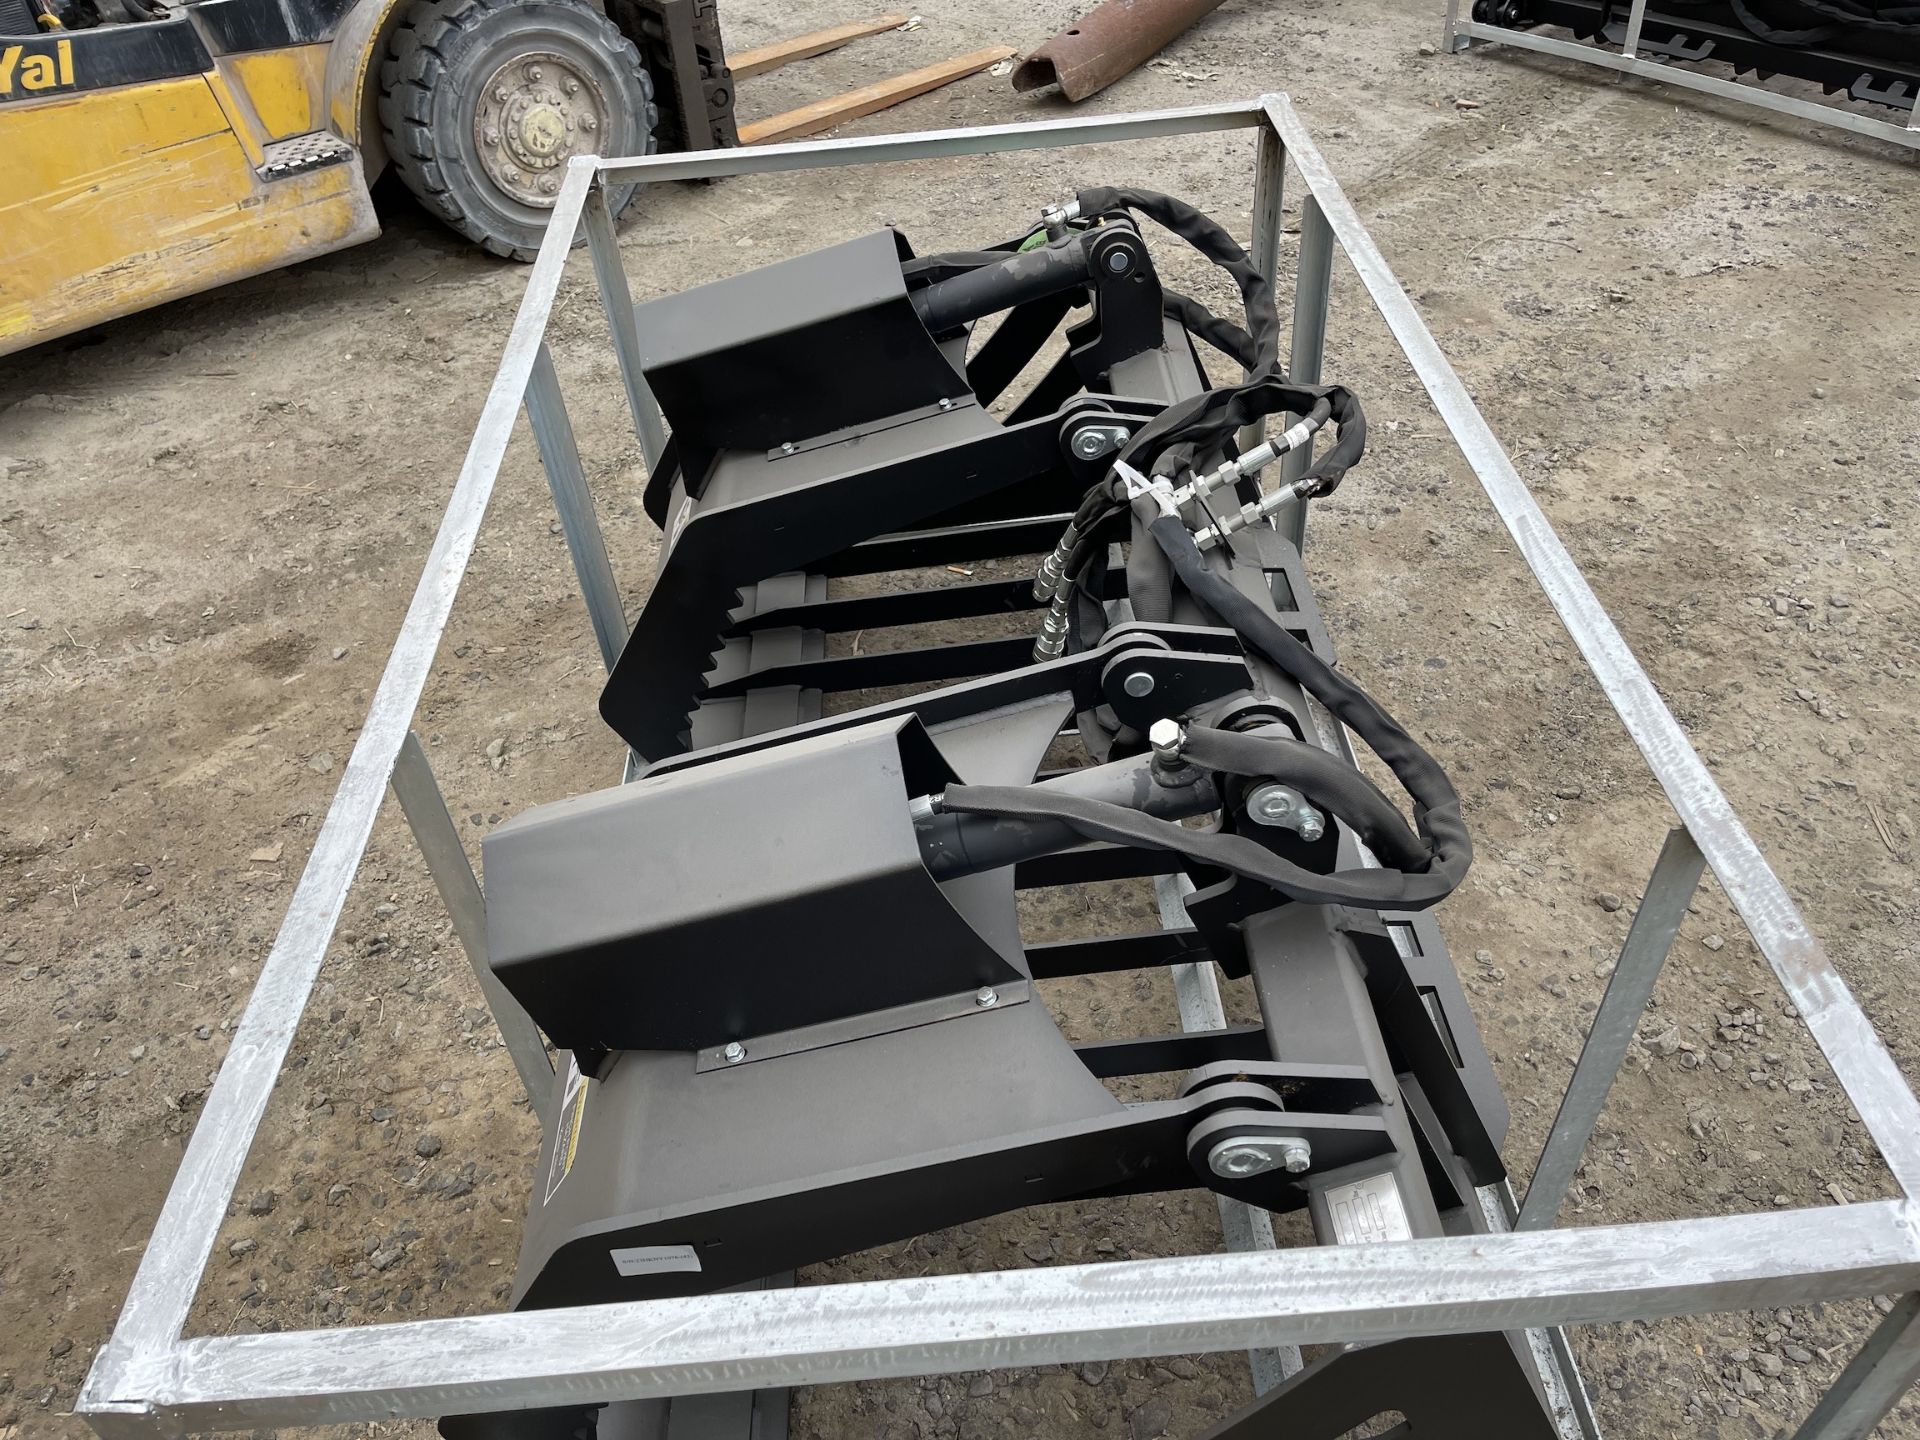 Brand New Greatbear 72" Rock Grapple Bucket Skid Steer Attachment (NY153) - Image 2 of 12